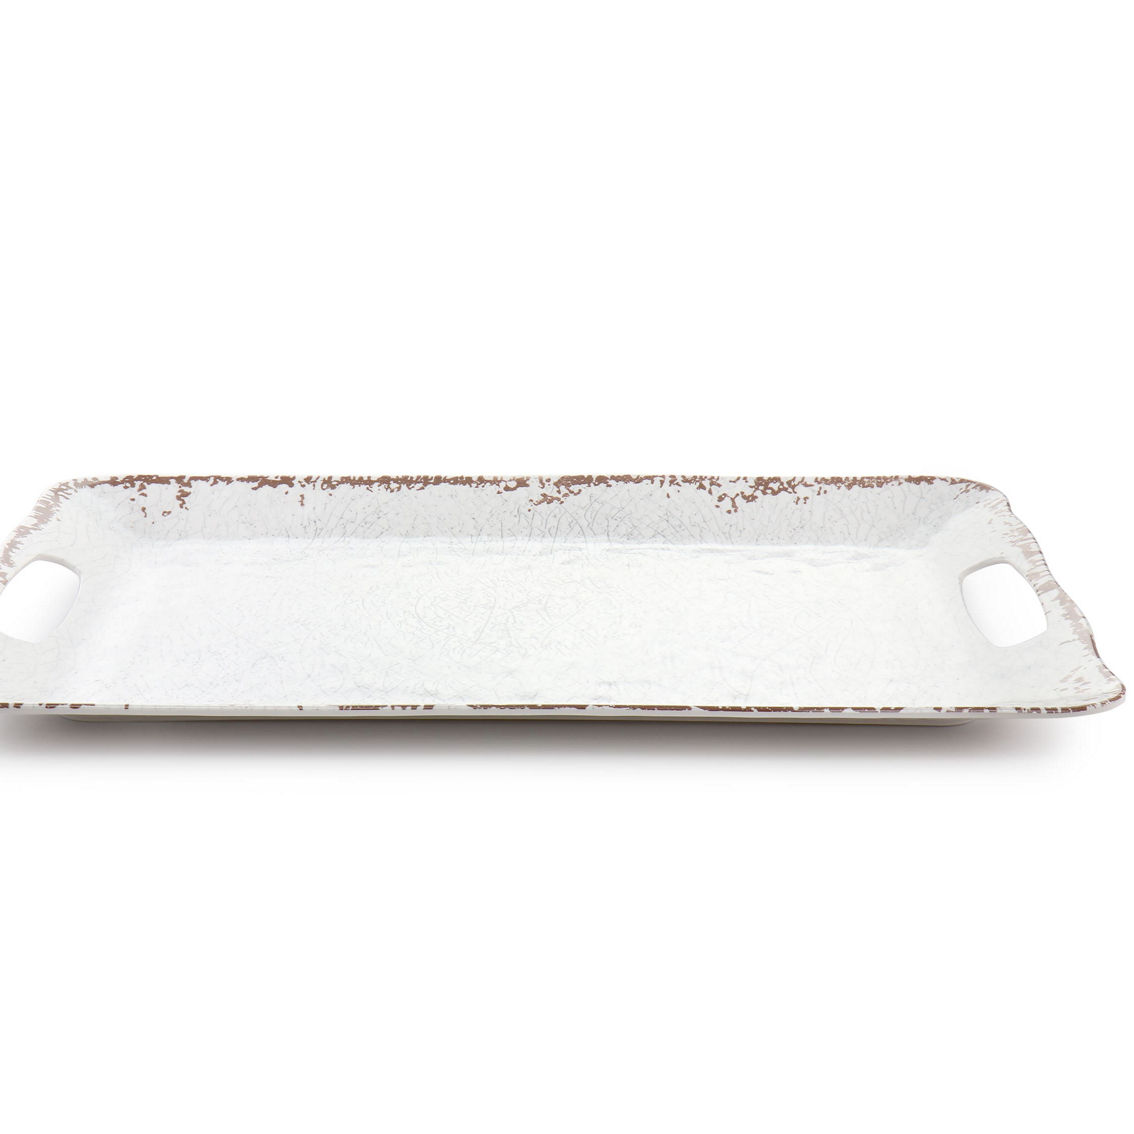 Laurie Gates Mauna 2 Piece Melamine Serving Tray Set in White - Image 4 of 5